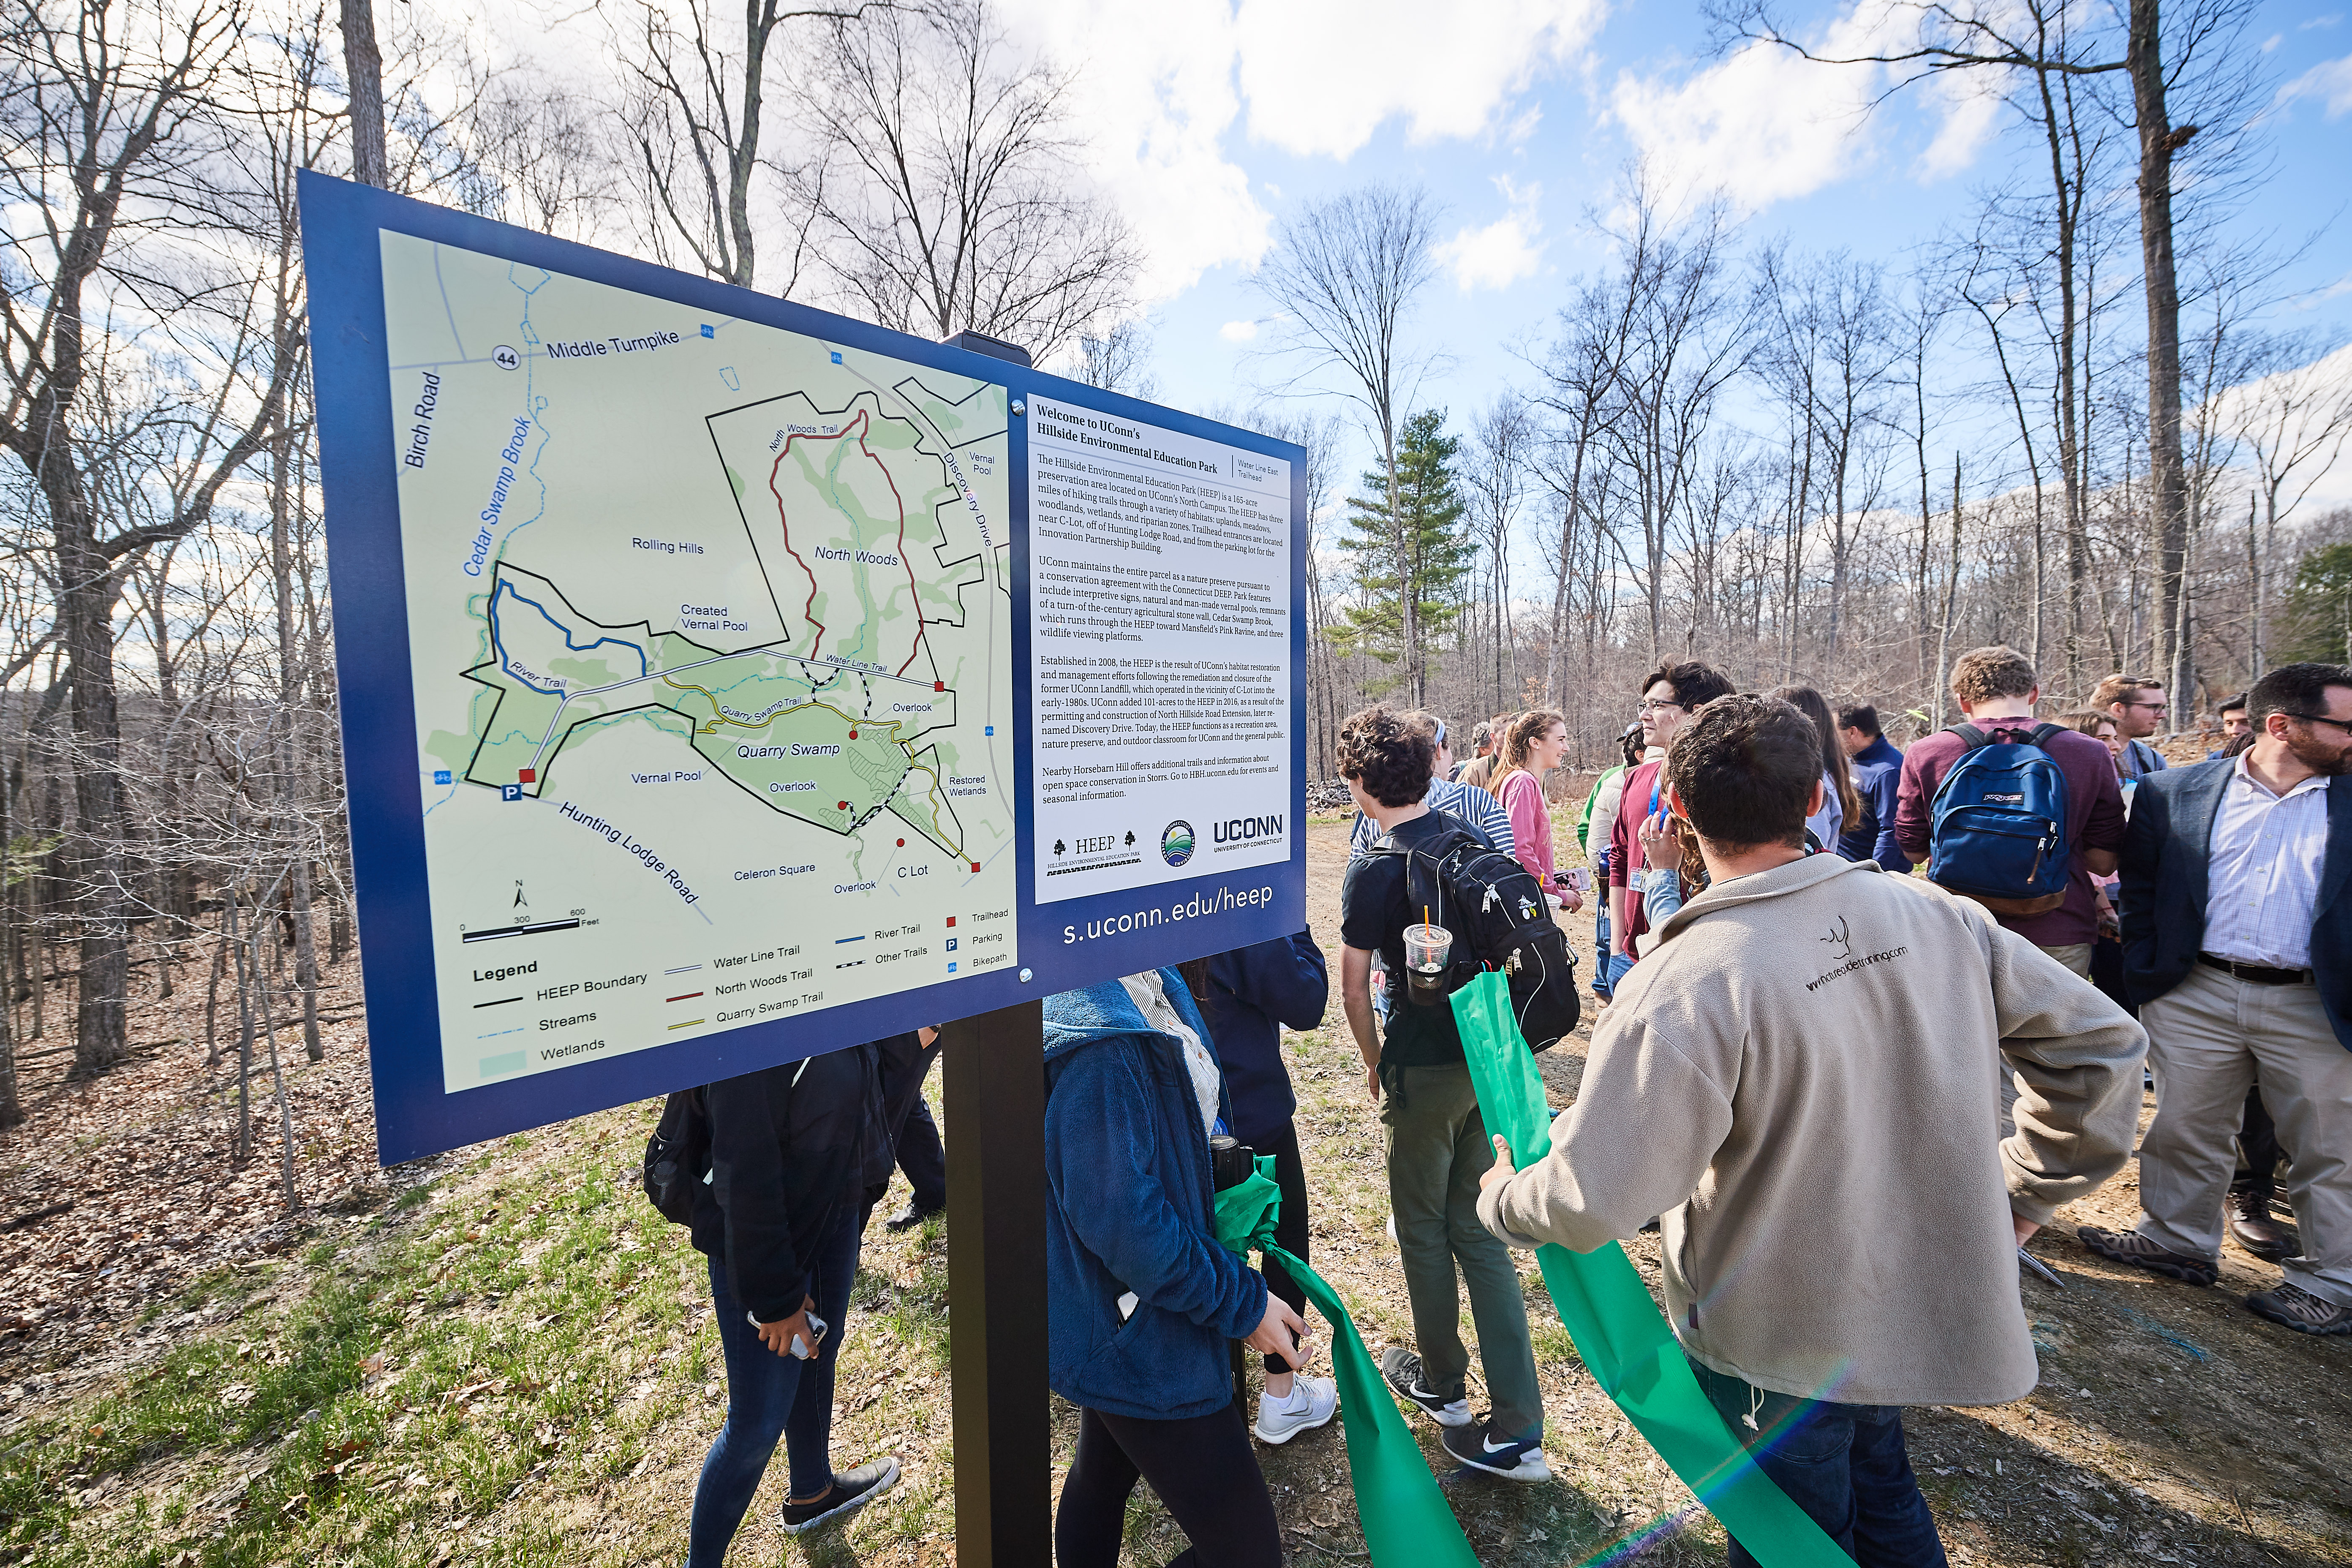 A group hike following the reopening of the Hillside Environmental Education Park trail near the Innovation Partnership Building on April 26, 2018. (Peter Morenus/UConn Photo)